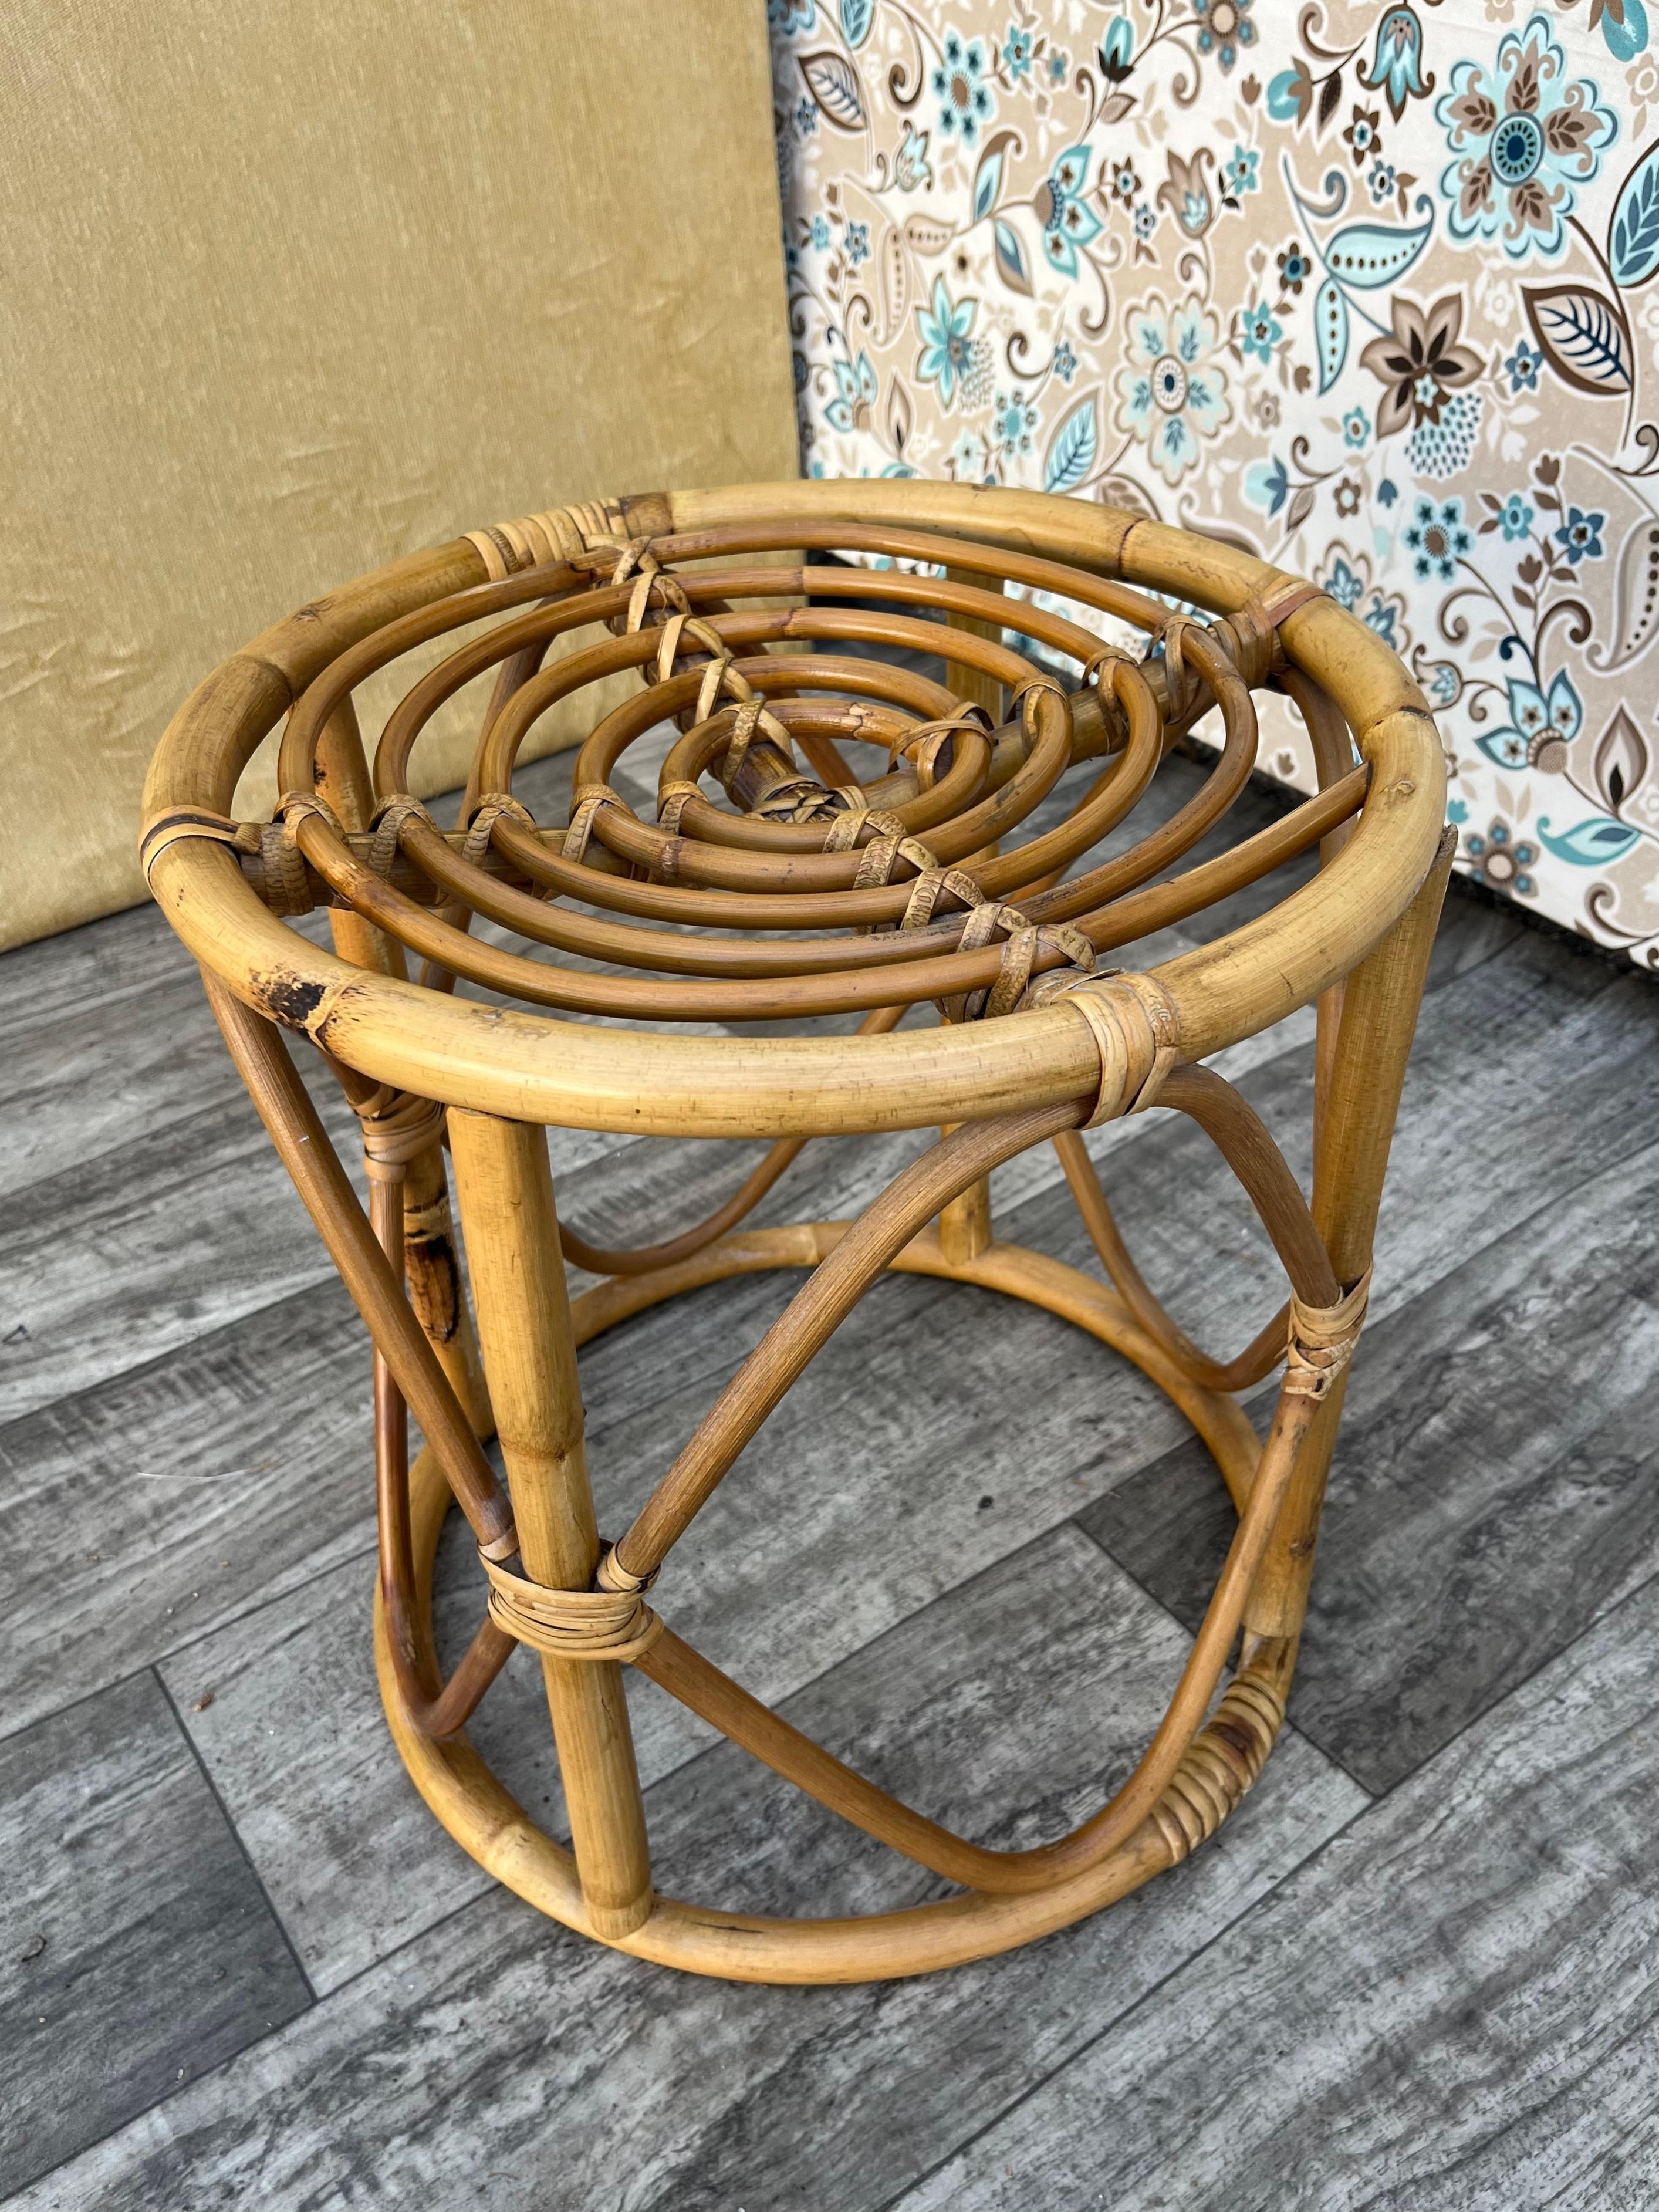 Late 20th Century Coastal Style Bamboo and Rattan Round Side Table / Plant Stand. Circa 1970s  For Sale